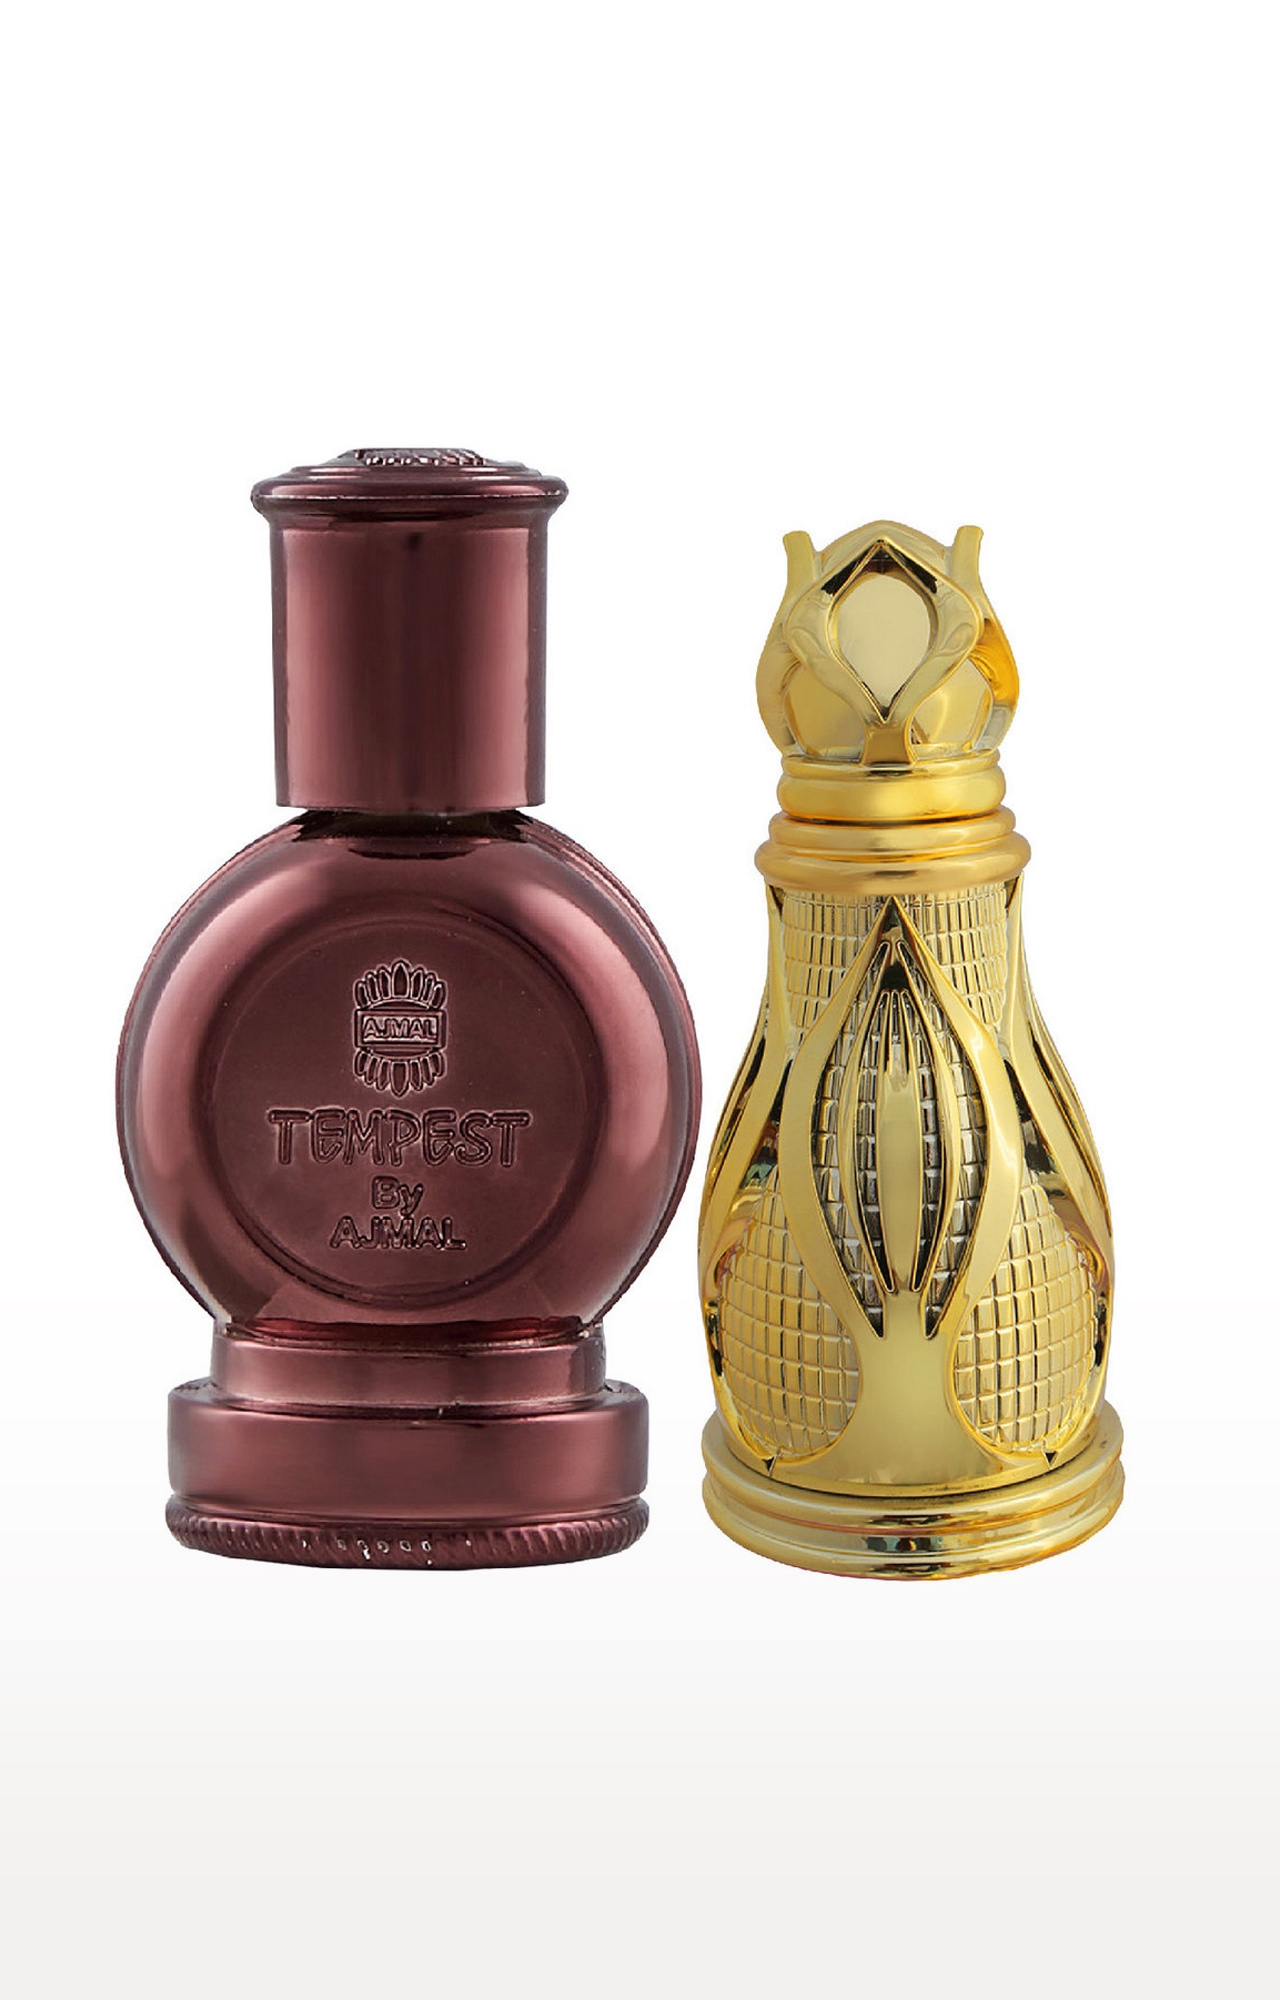 Ajmal | Ajmal Tempest Concentrated Perfume Oil Floral Alcohol-free Attar 12ml for Unisex and Khofooq Concentrated Perfume Oil Woody Oudhy Alcohol-free Attar 18ml for Unisex + 2 Parfum Testers FREE